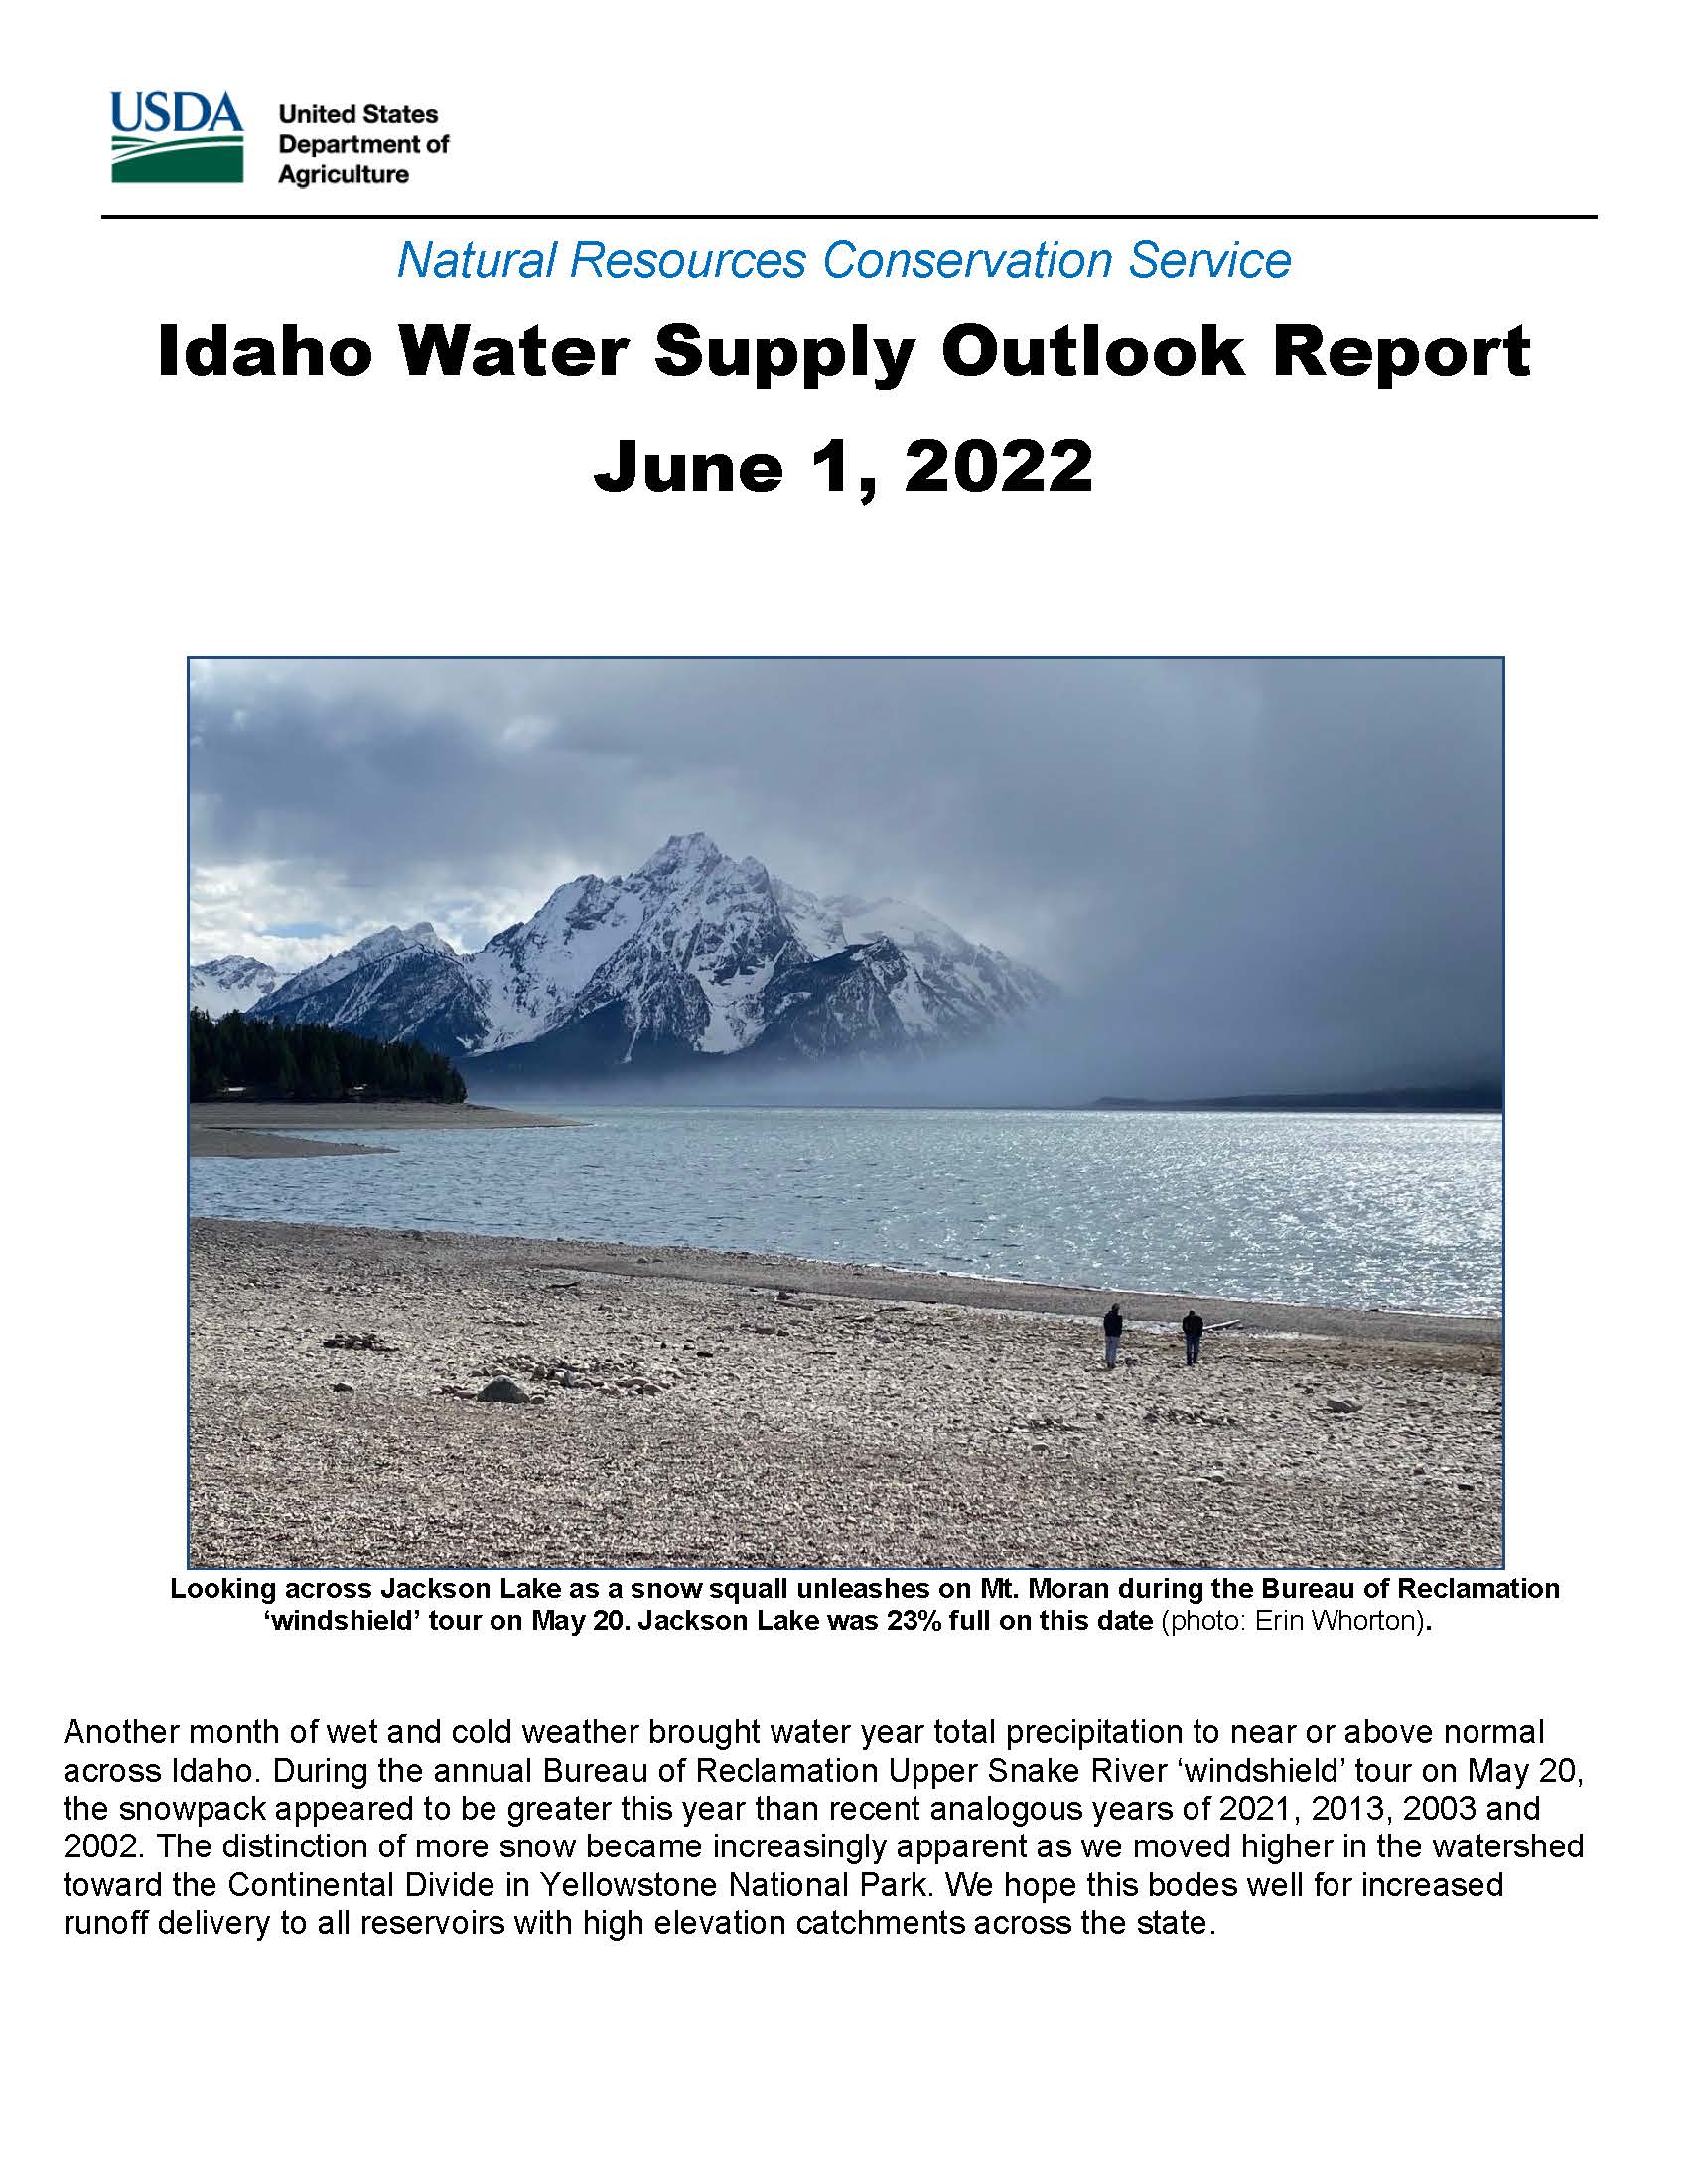 Cover of the June 1, 2022 Water Supply Report